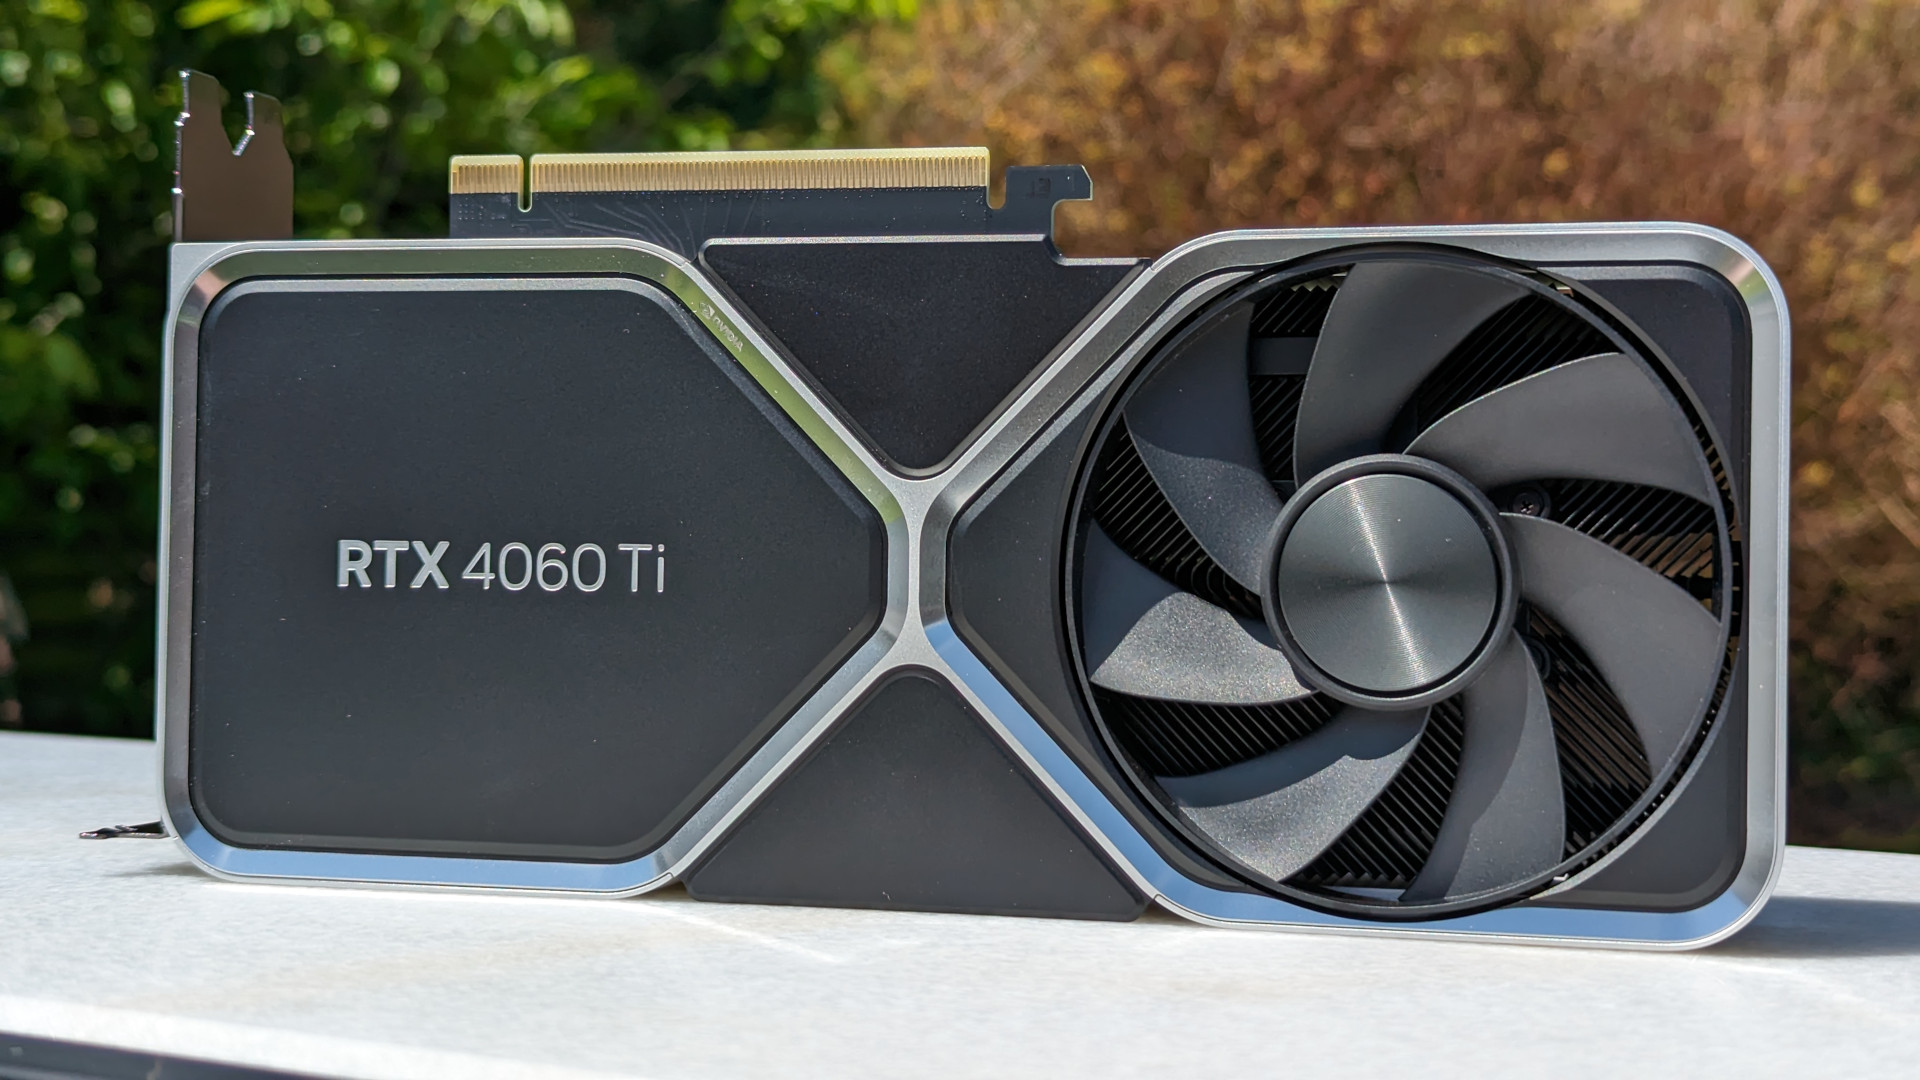 Nvidia GeForce RTX 4060 Ti 8GB review: The graphics card atop a white surface, against a nature-themed backdrop